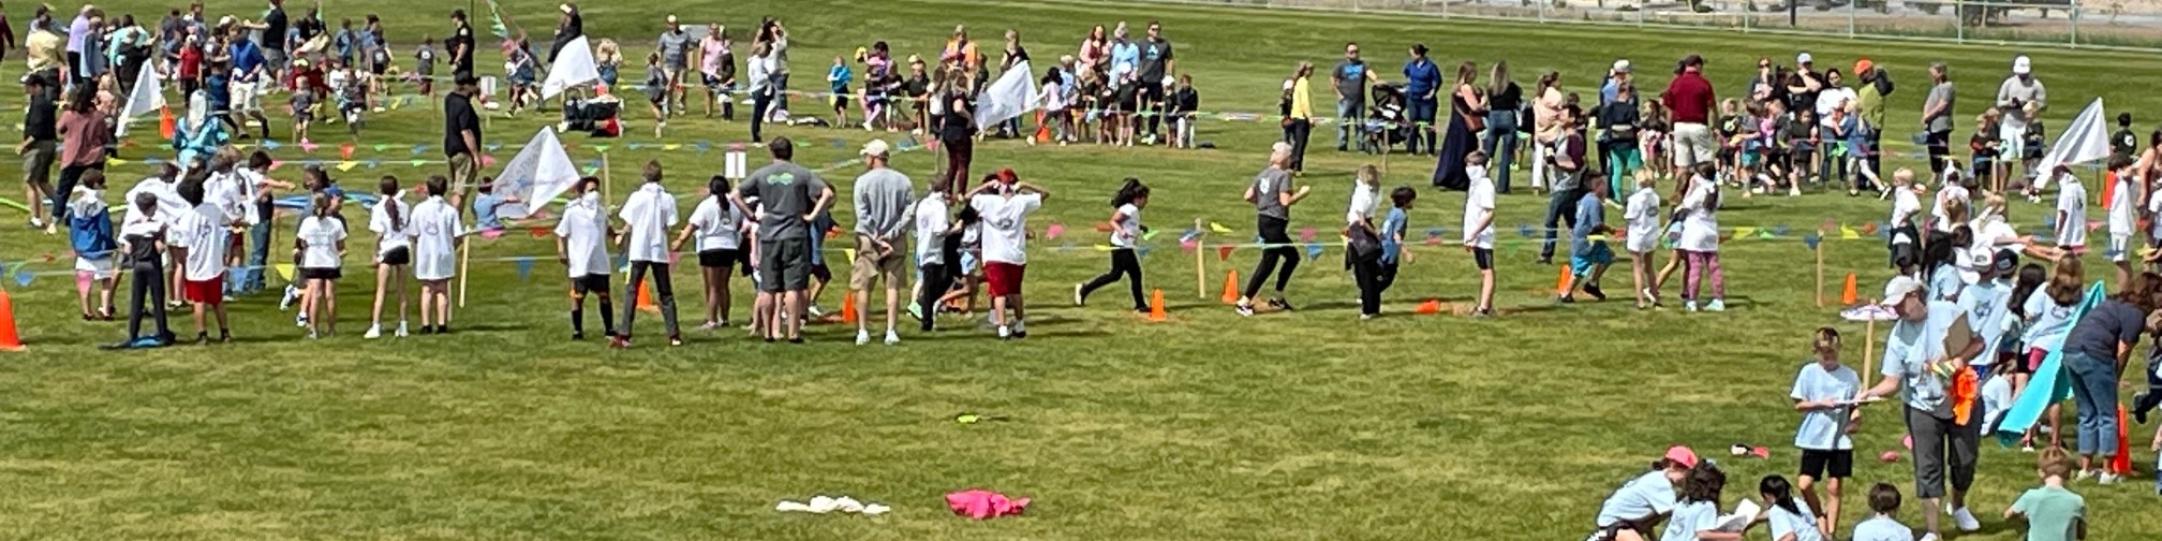 Prize day fitness/fun run from our fundraiser!